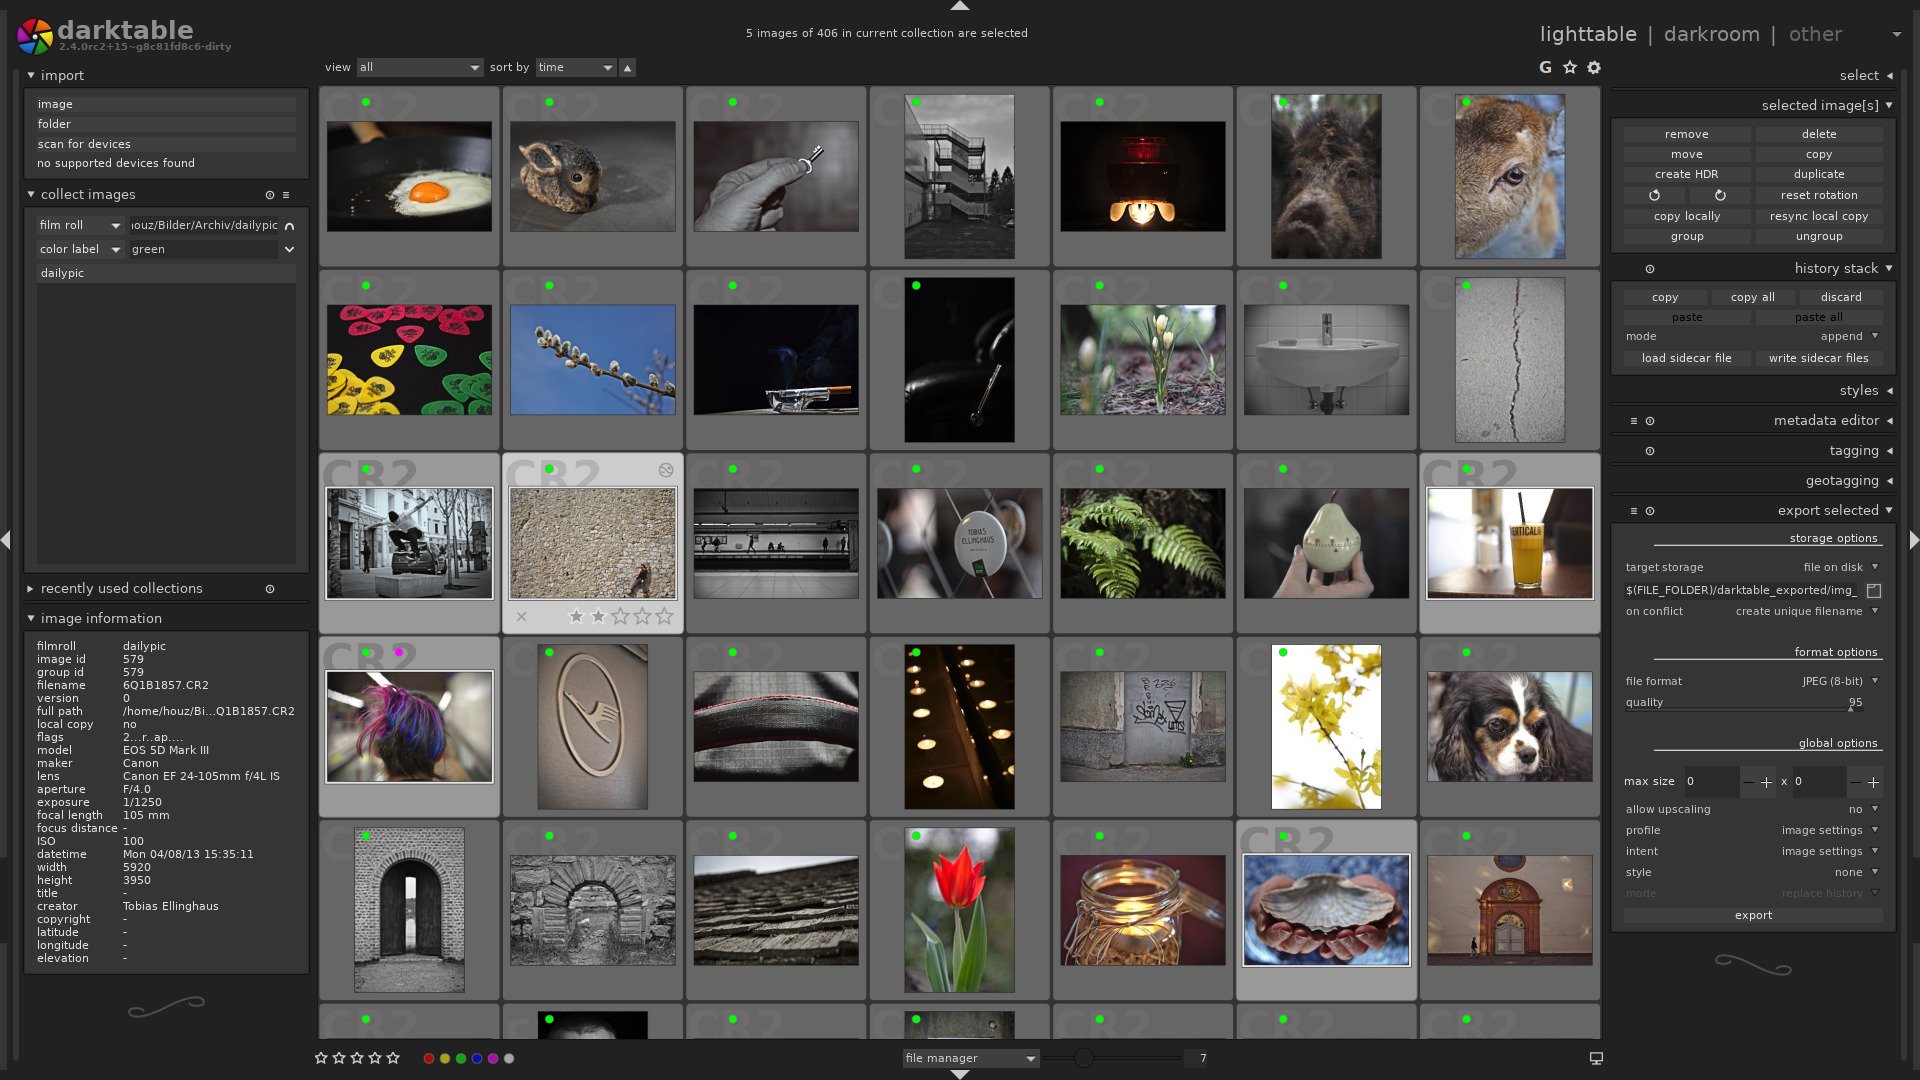 First Darktable 3.0 Release Candidate is Live with New Features and Major UI Improvements